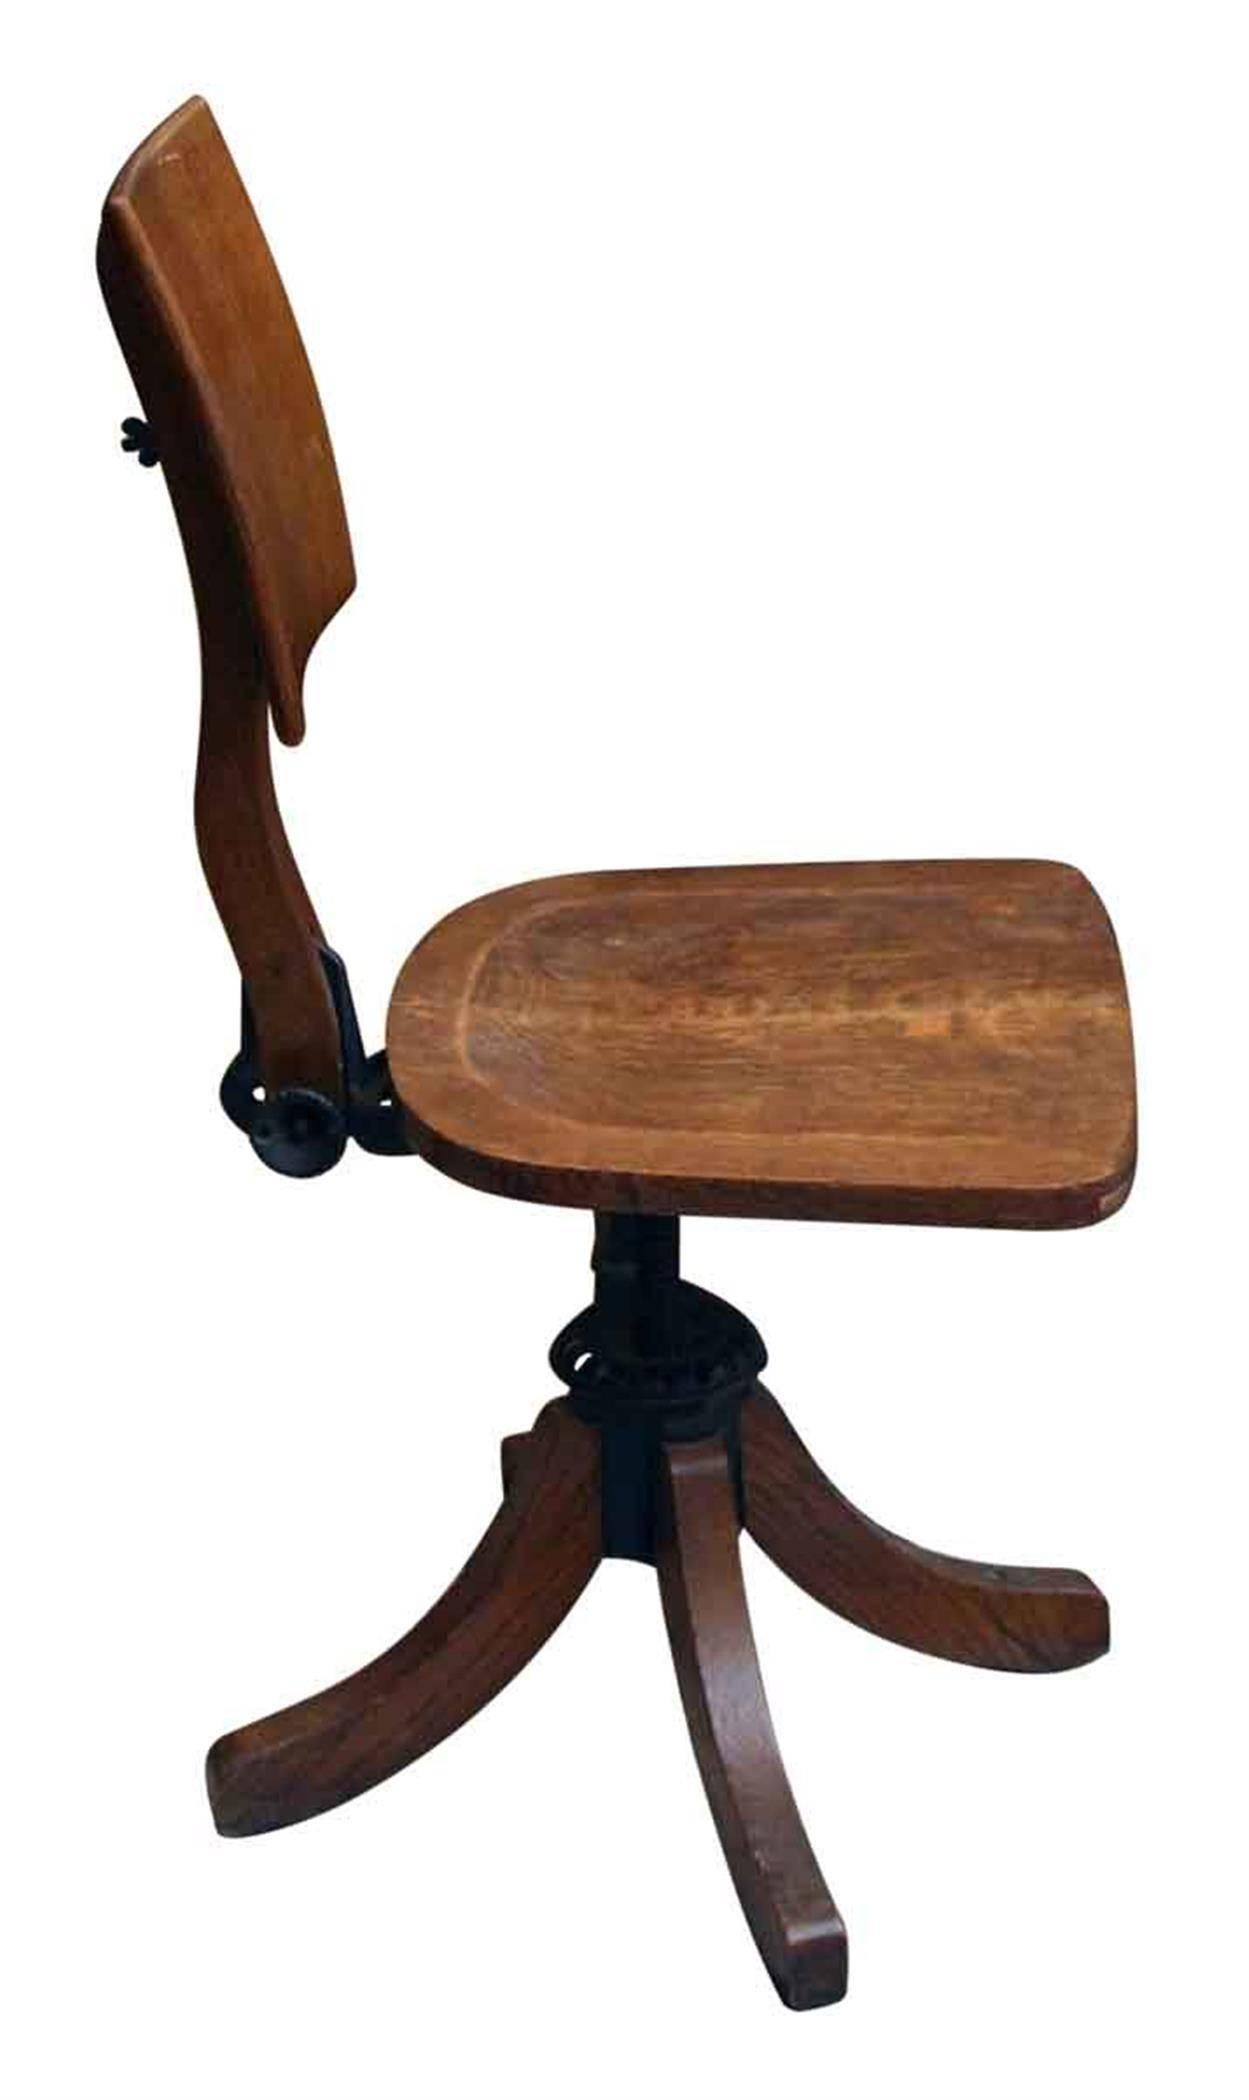 1920s dark wood tone oak office chair with a unique back and adjustable settings. This can be seen at our 5 East 16th St location on Union Square in Manhattan.